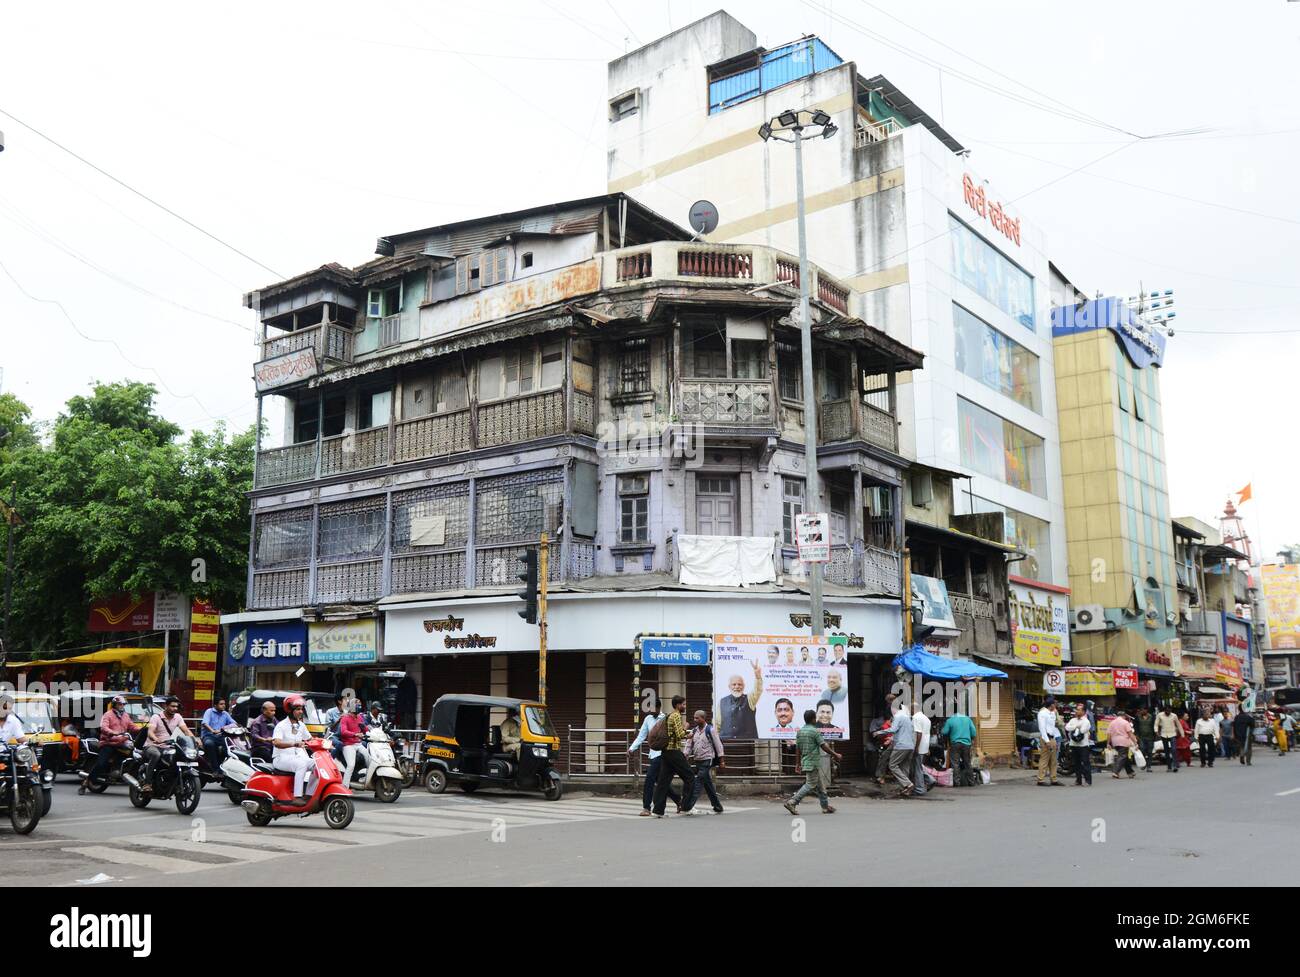 Busy city center at the junction of Laxmi road and Budhwar Peth road in Pune, India. Stock Photo